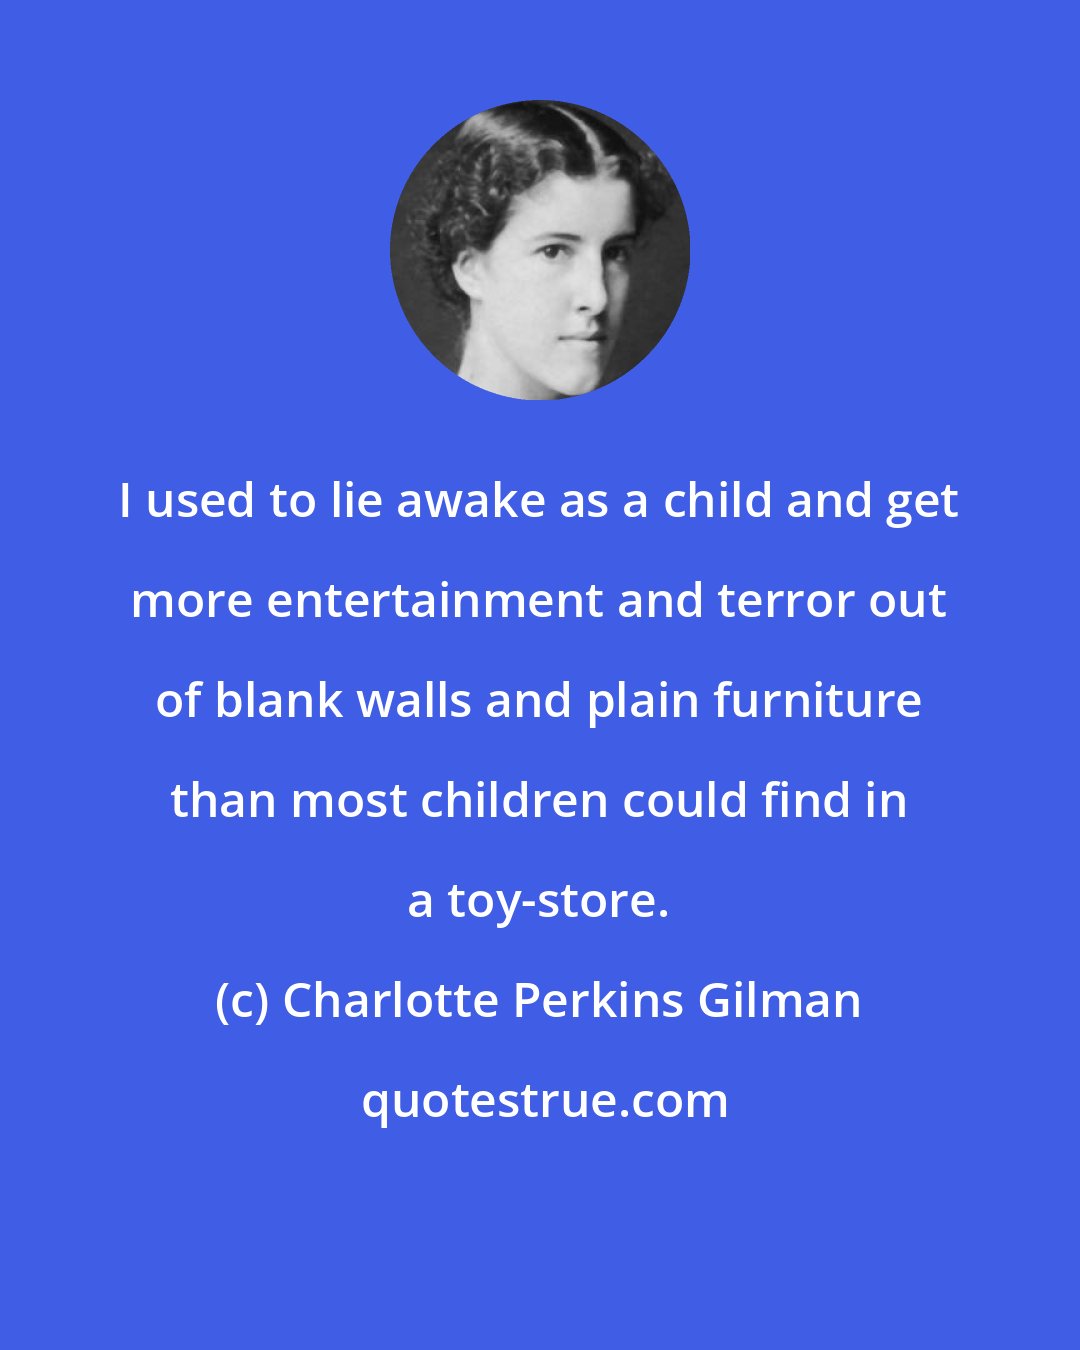 Charlotte Perkins Gilman: I used to lie awake as a child and get more entertainment and terror out of blank walls and plain furniture than most children could find in a toy-store.